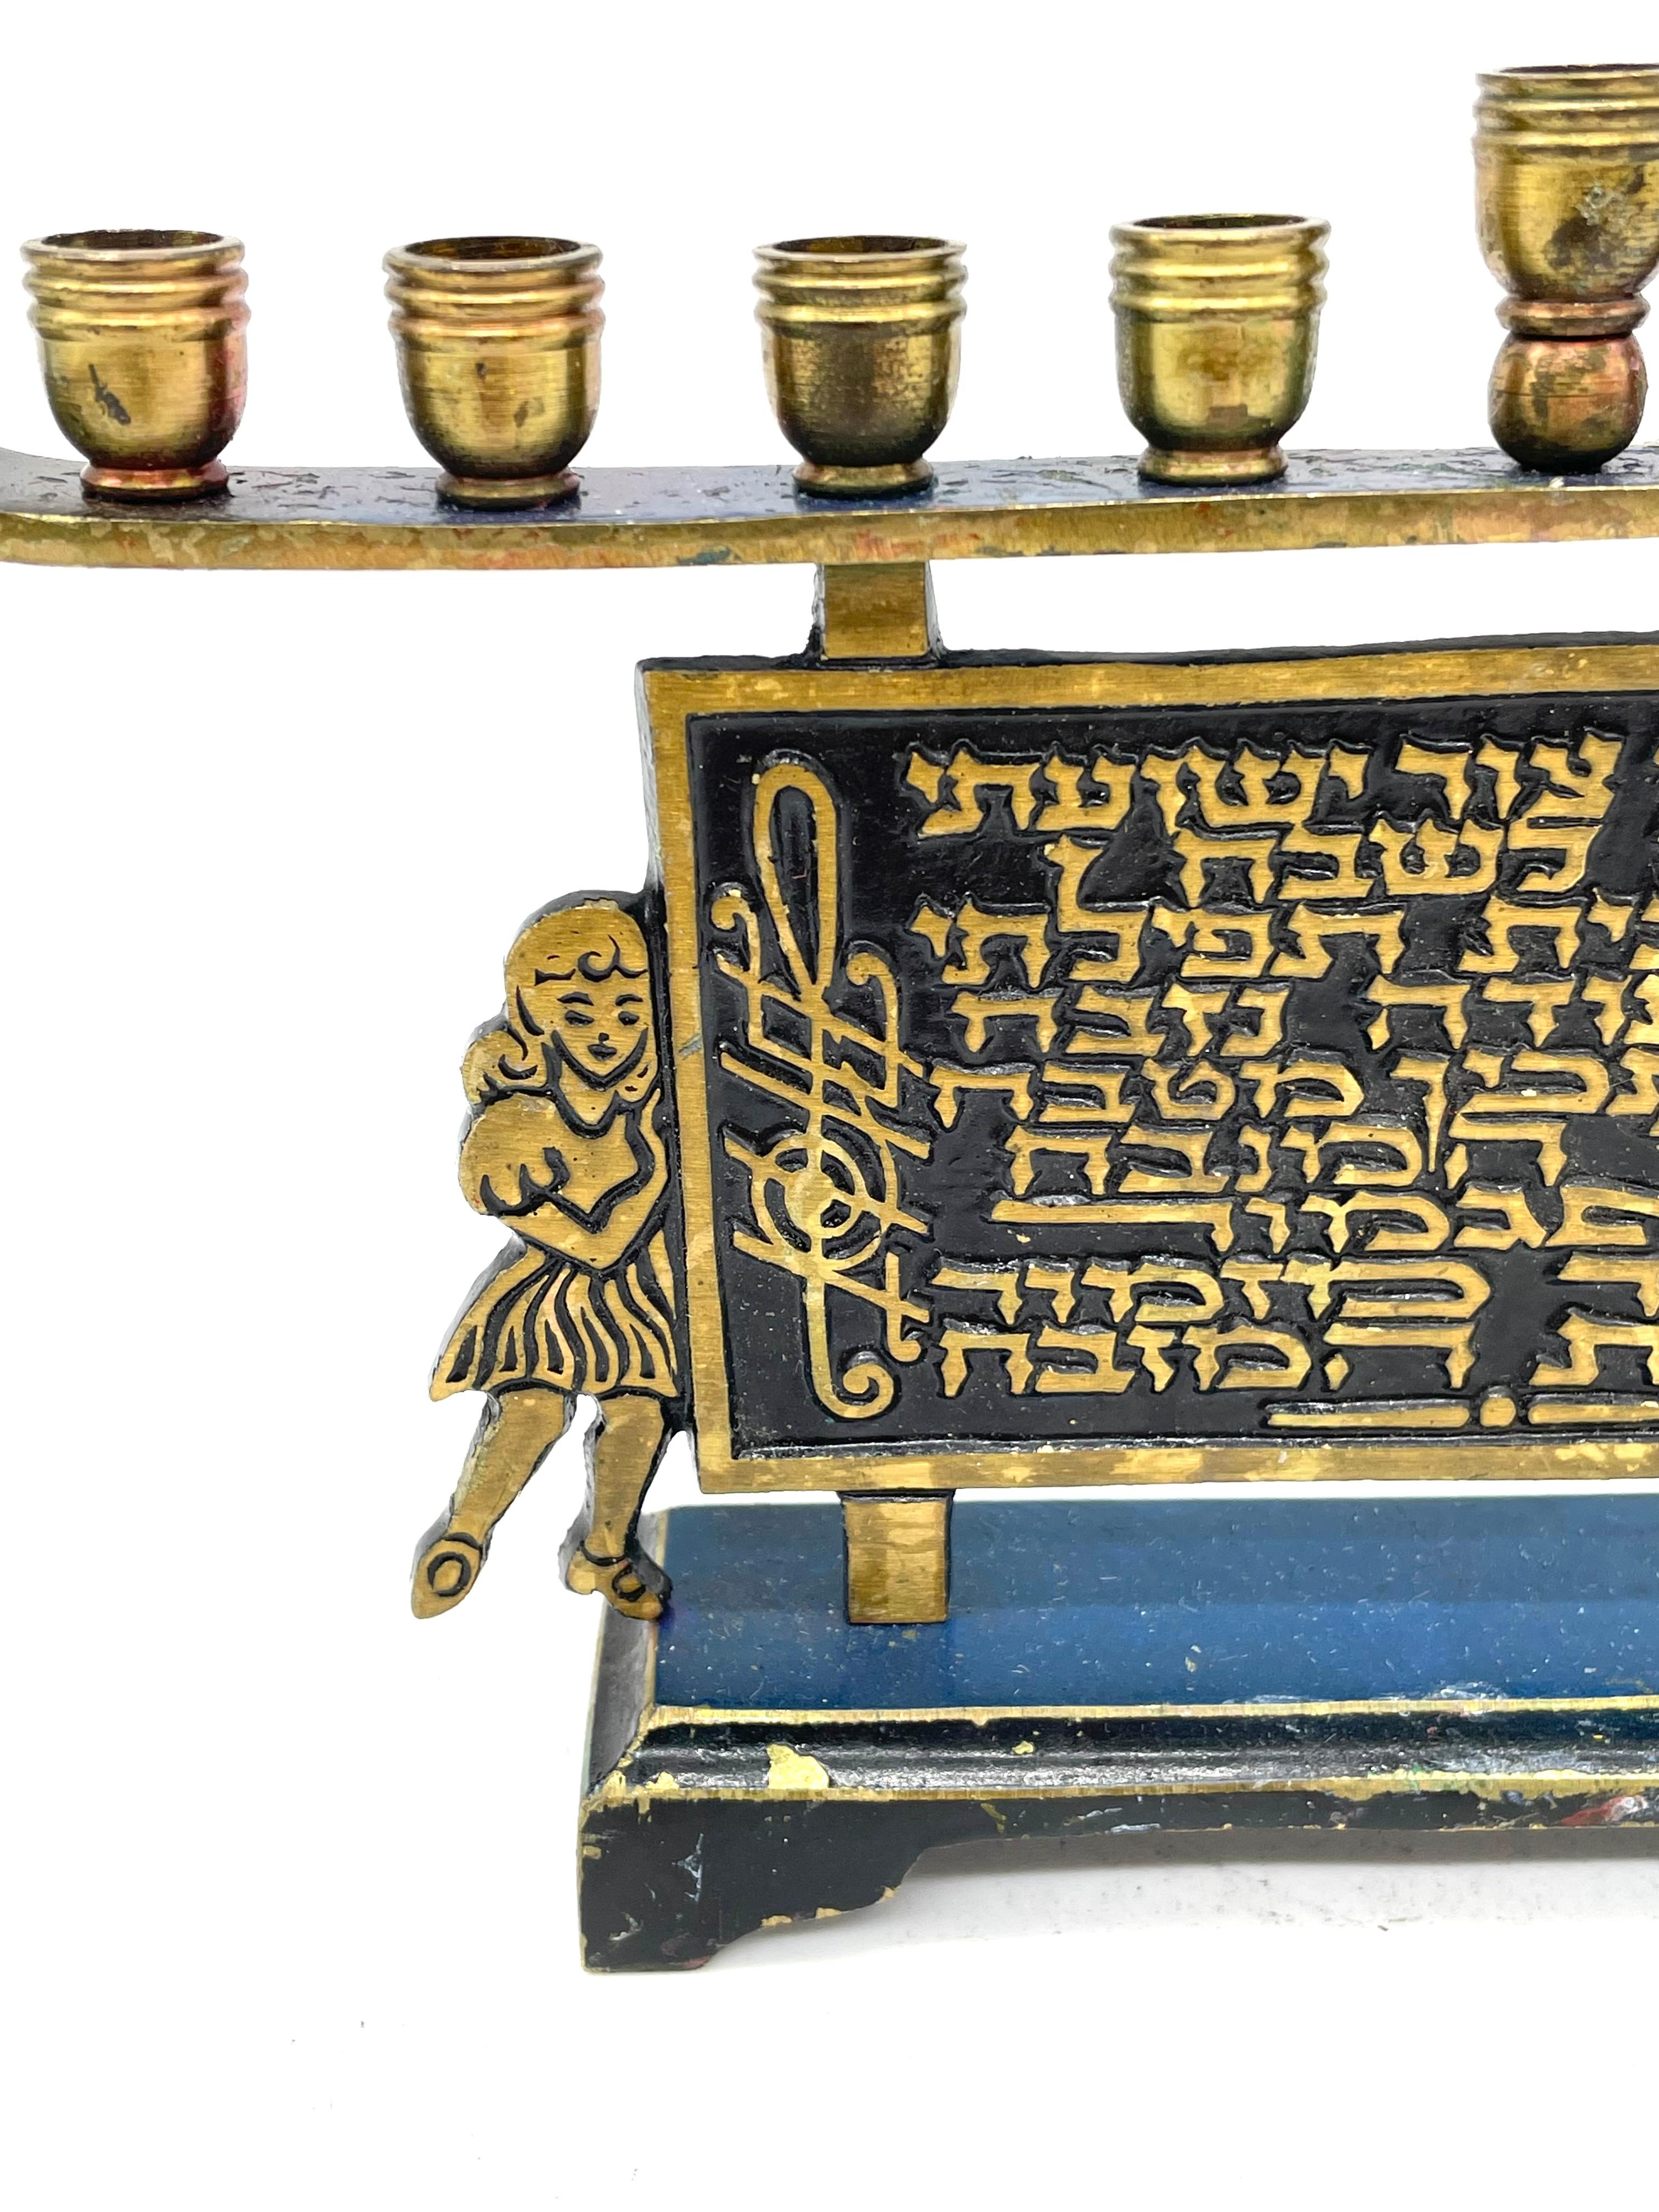 Cast brass made in Israel, circa 1950. Decorated with Hanukkah song 